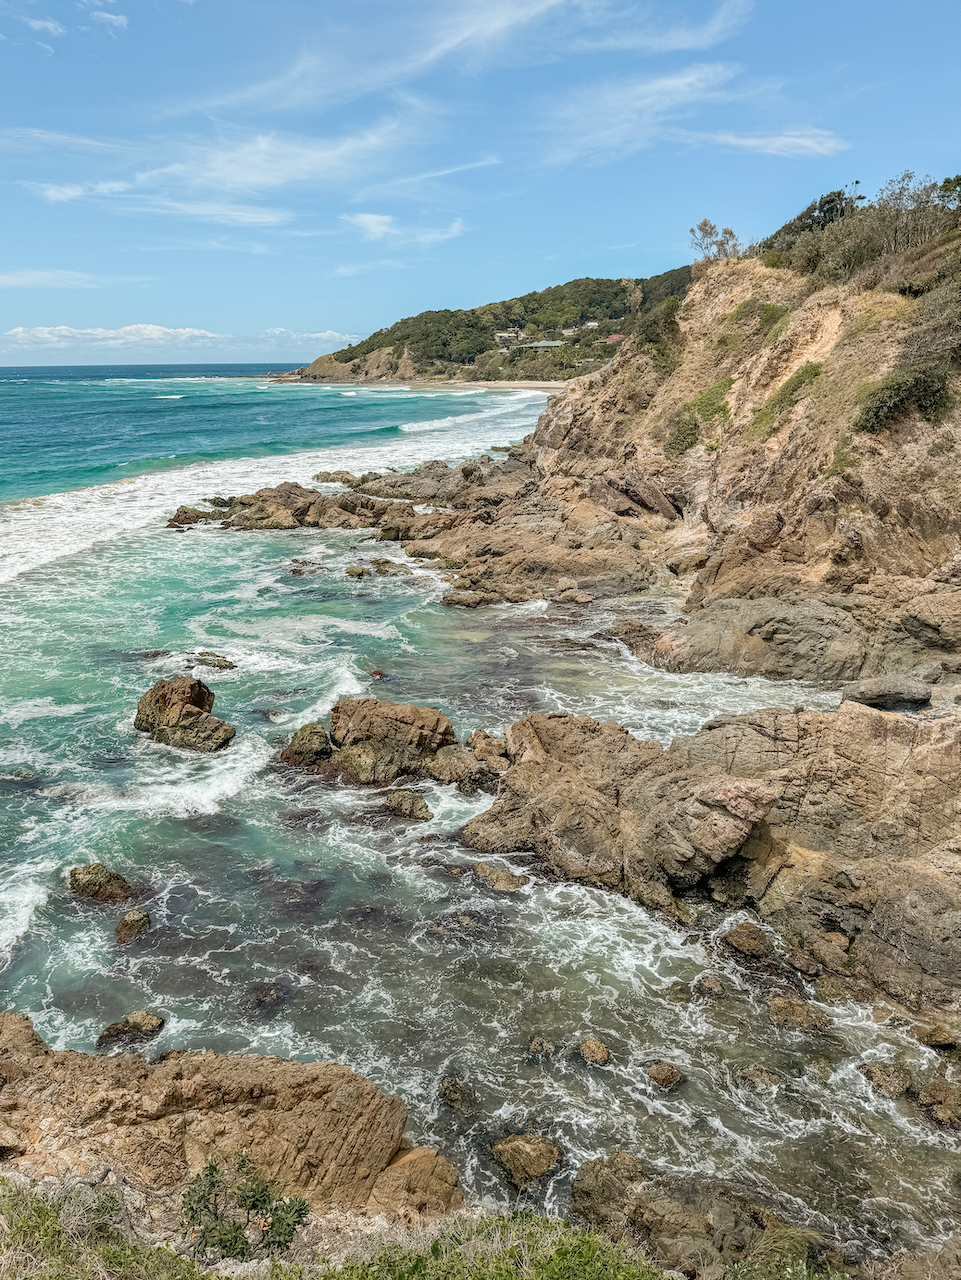 The cliffs and the waves at the Pass - Byron Bay - New South Wales - Australia